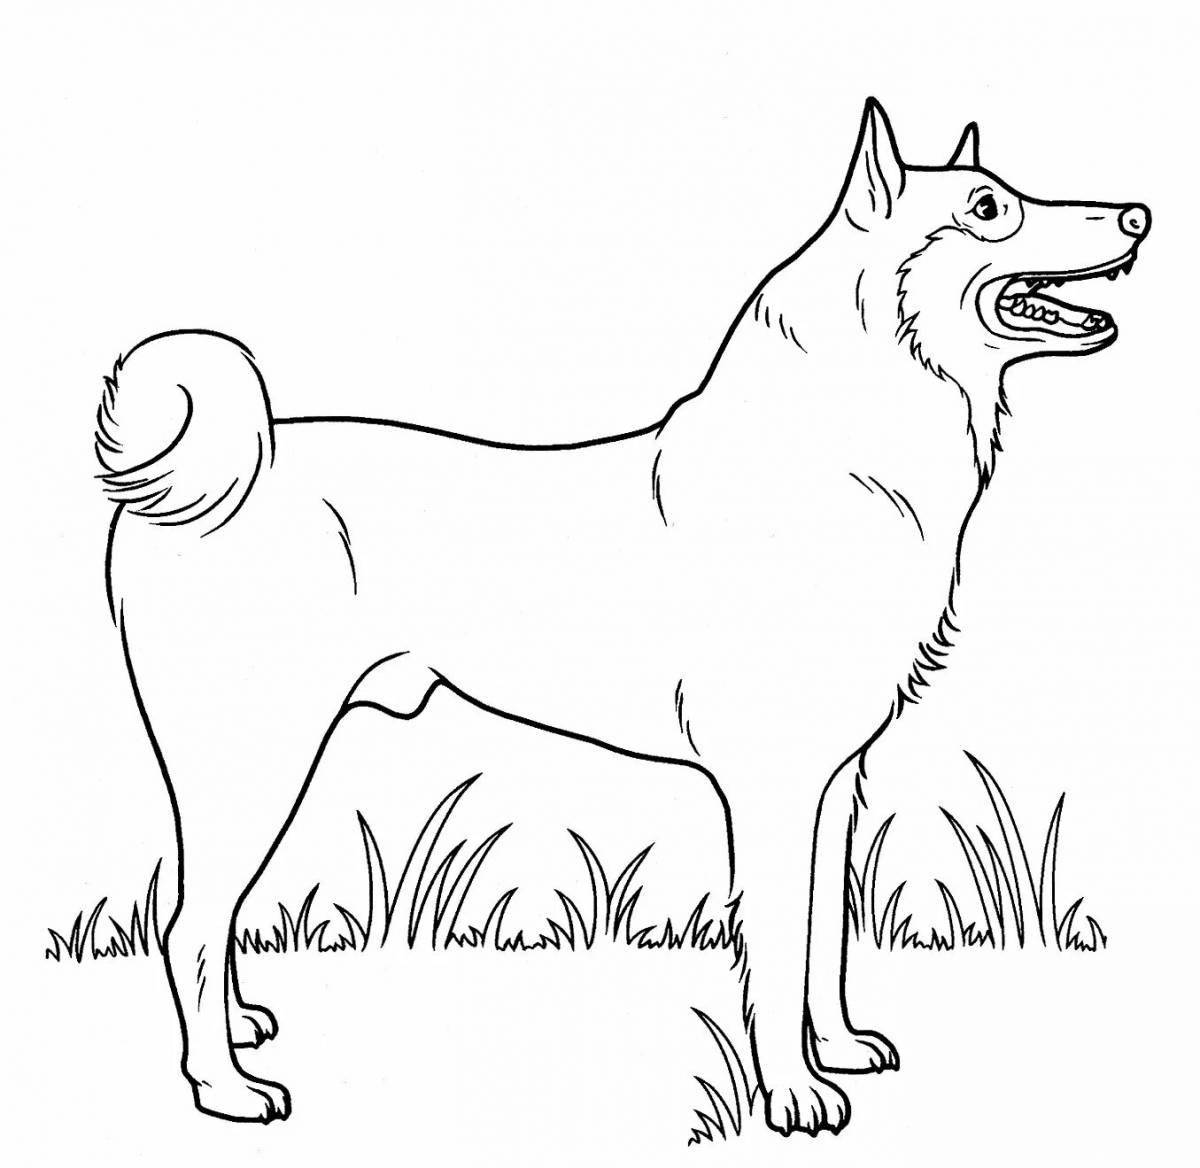 Funny service dogs coloring pages for kids